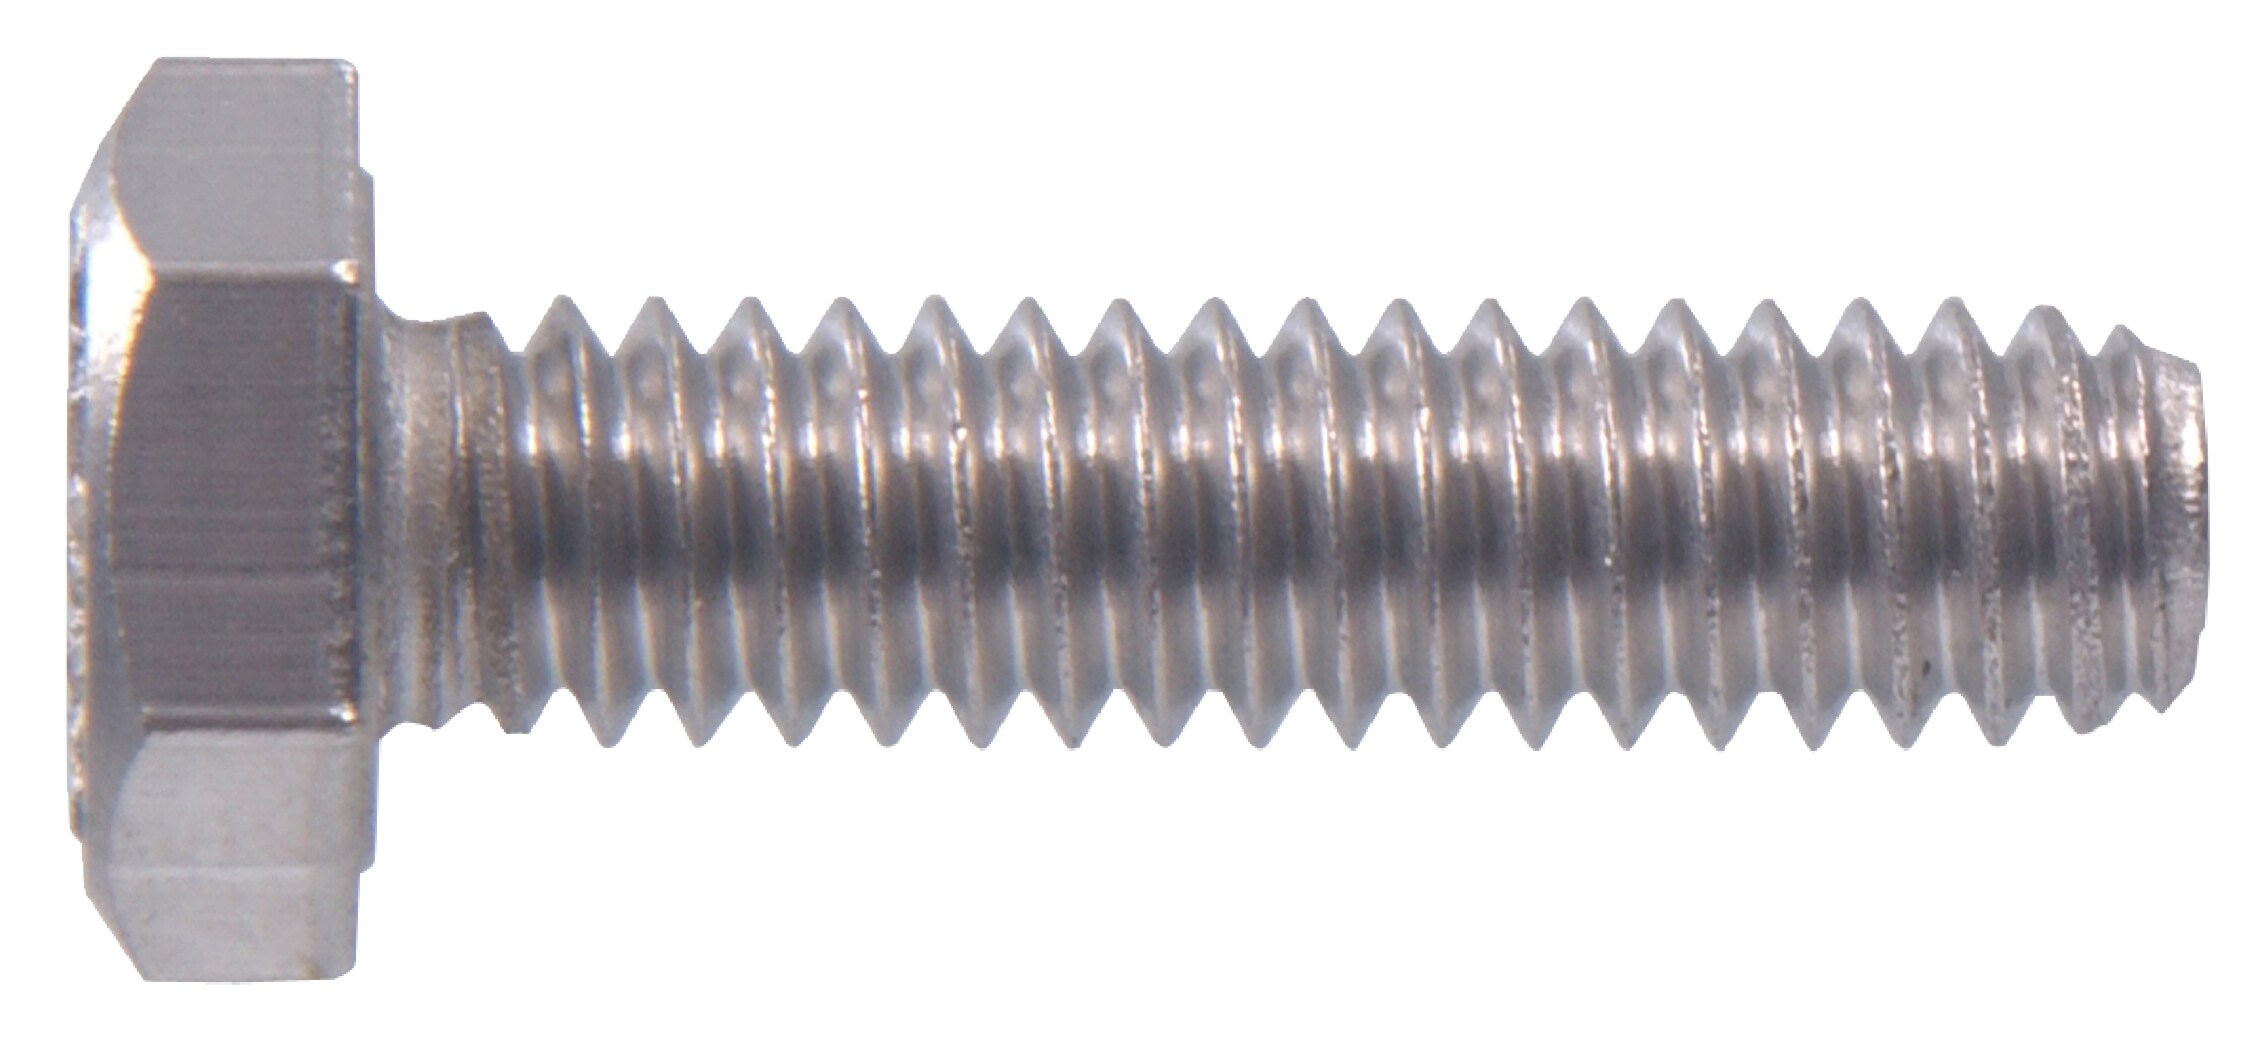 Hillman 1/4-in x 1-in Zinc-Plated Coarse Thread Hex Bolt (2-Count